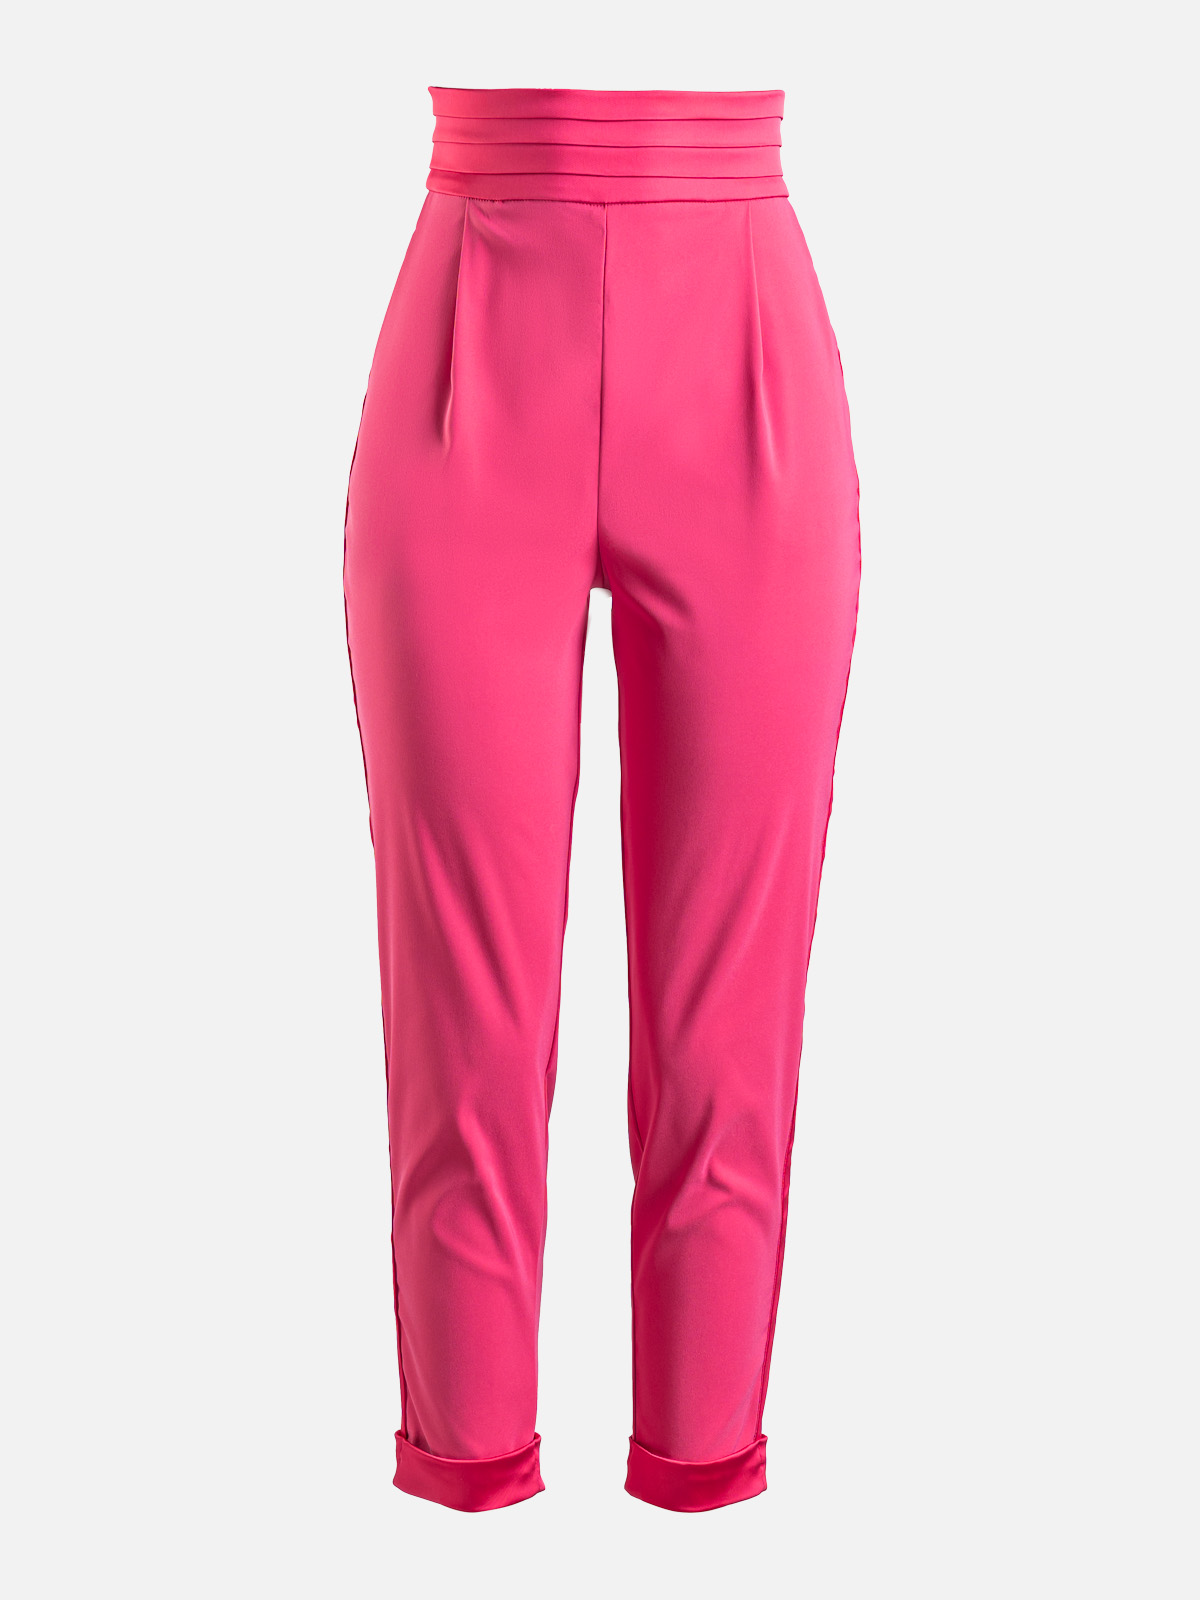 Dollar Missy Women Pack of 1 Straight Fit Solid Cigarette Trousers- Hot Pink  – Dollarshoppe